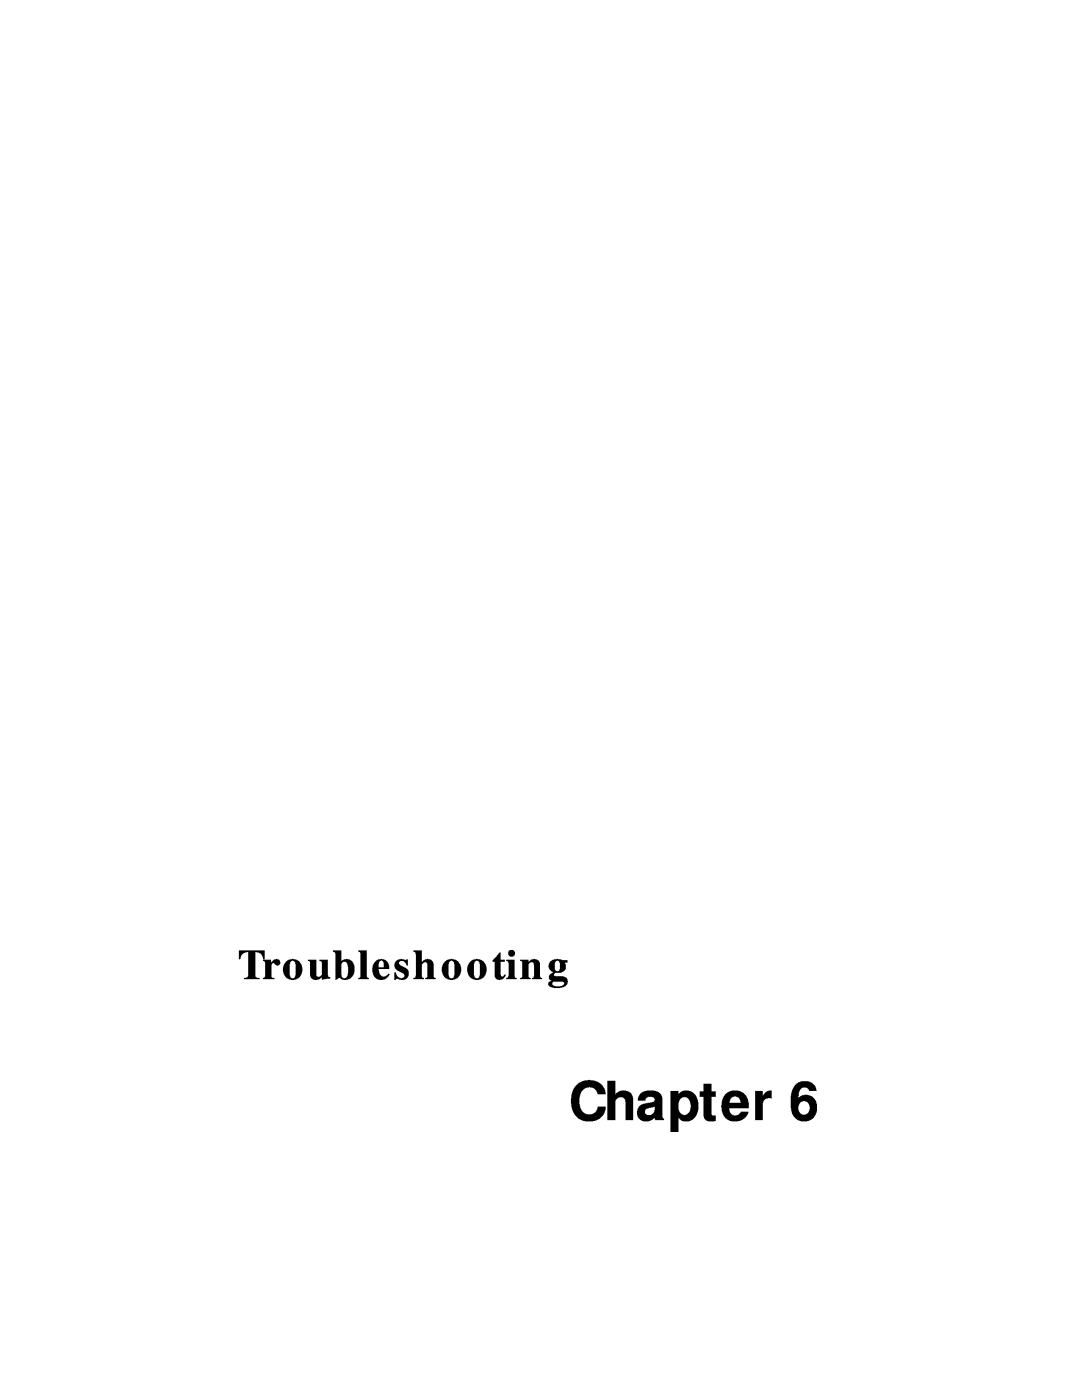 Acer 330 Series manual Troubleshooting, Chapter 